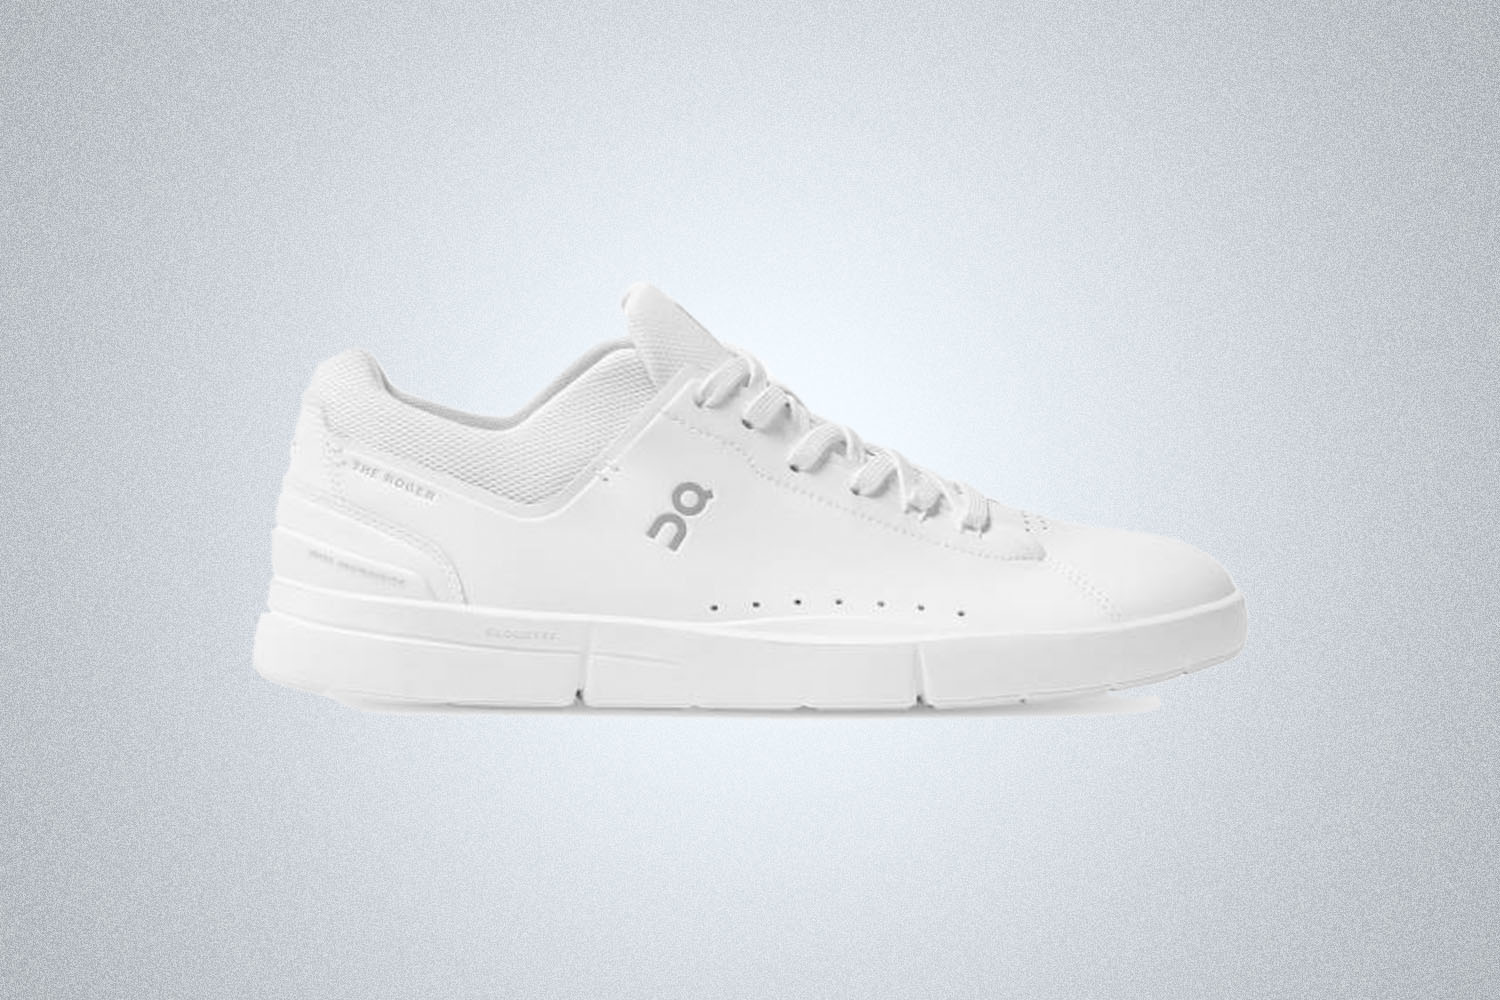 a pair of white On Roger Tennis Shoes on a grey background